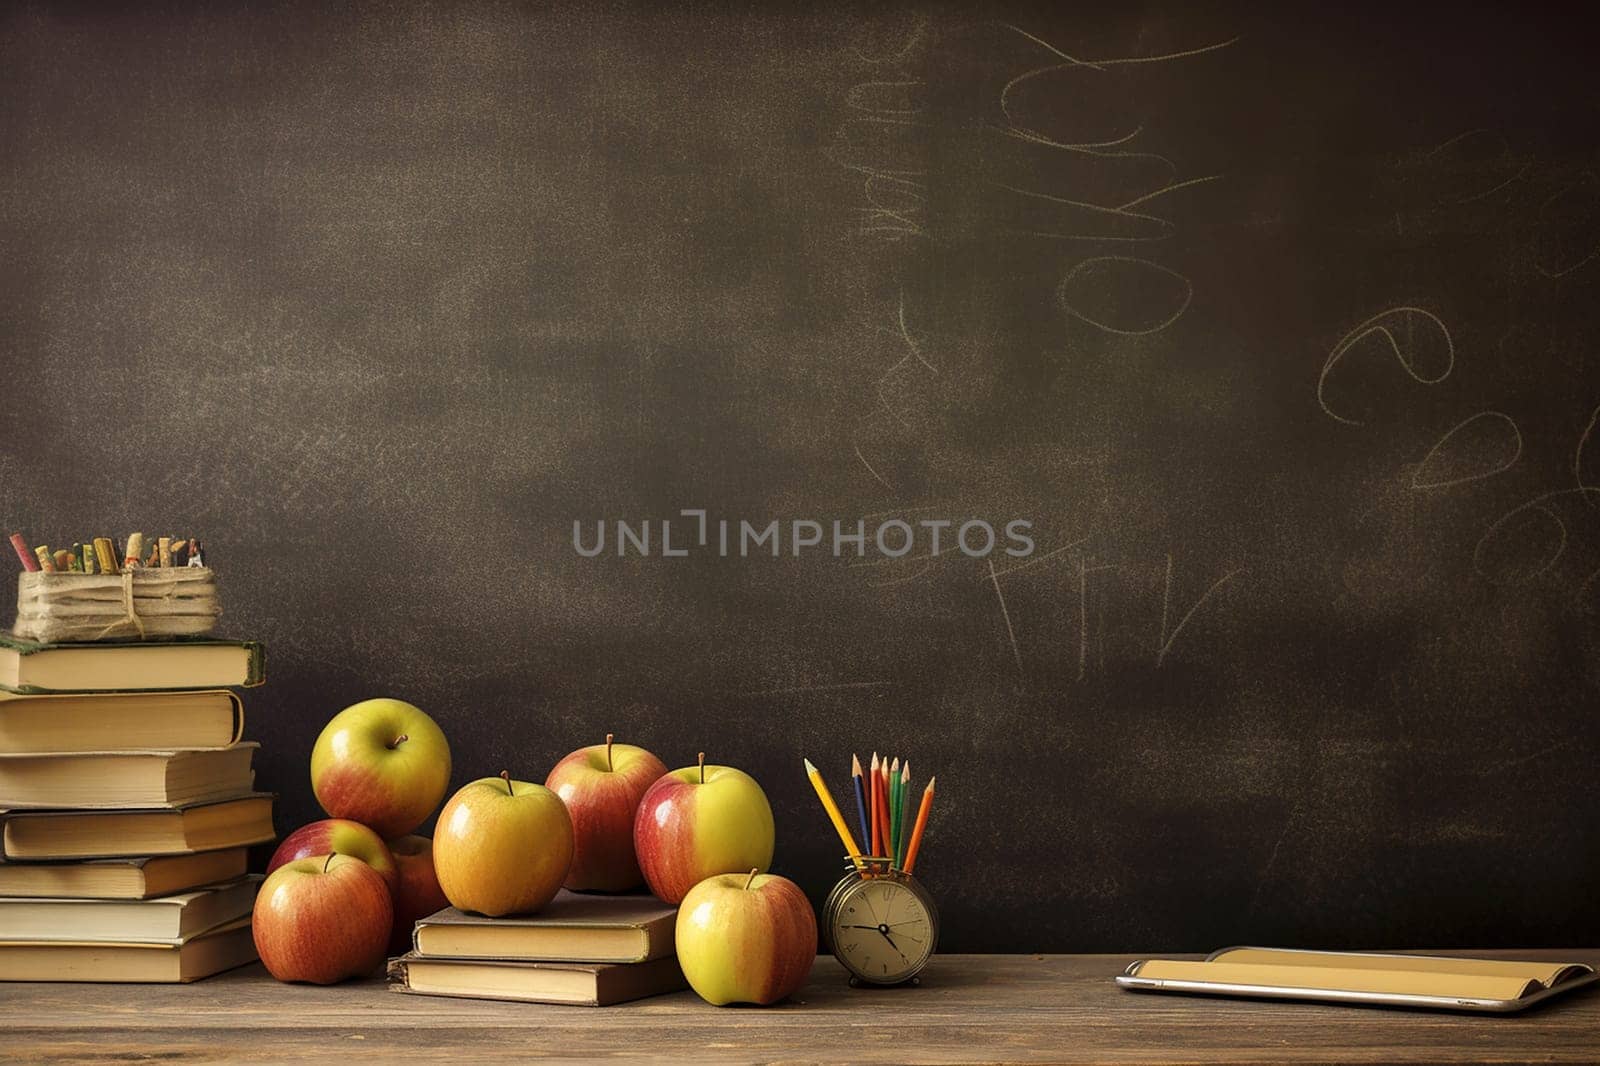 A Still Life of Education: Apples and Books Against a Chalkboard background